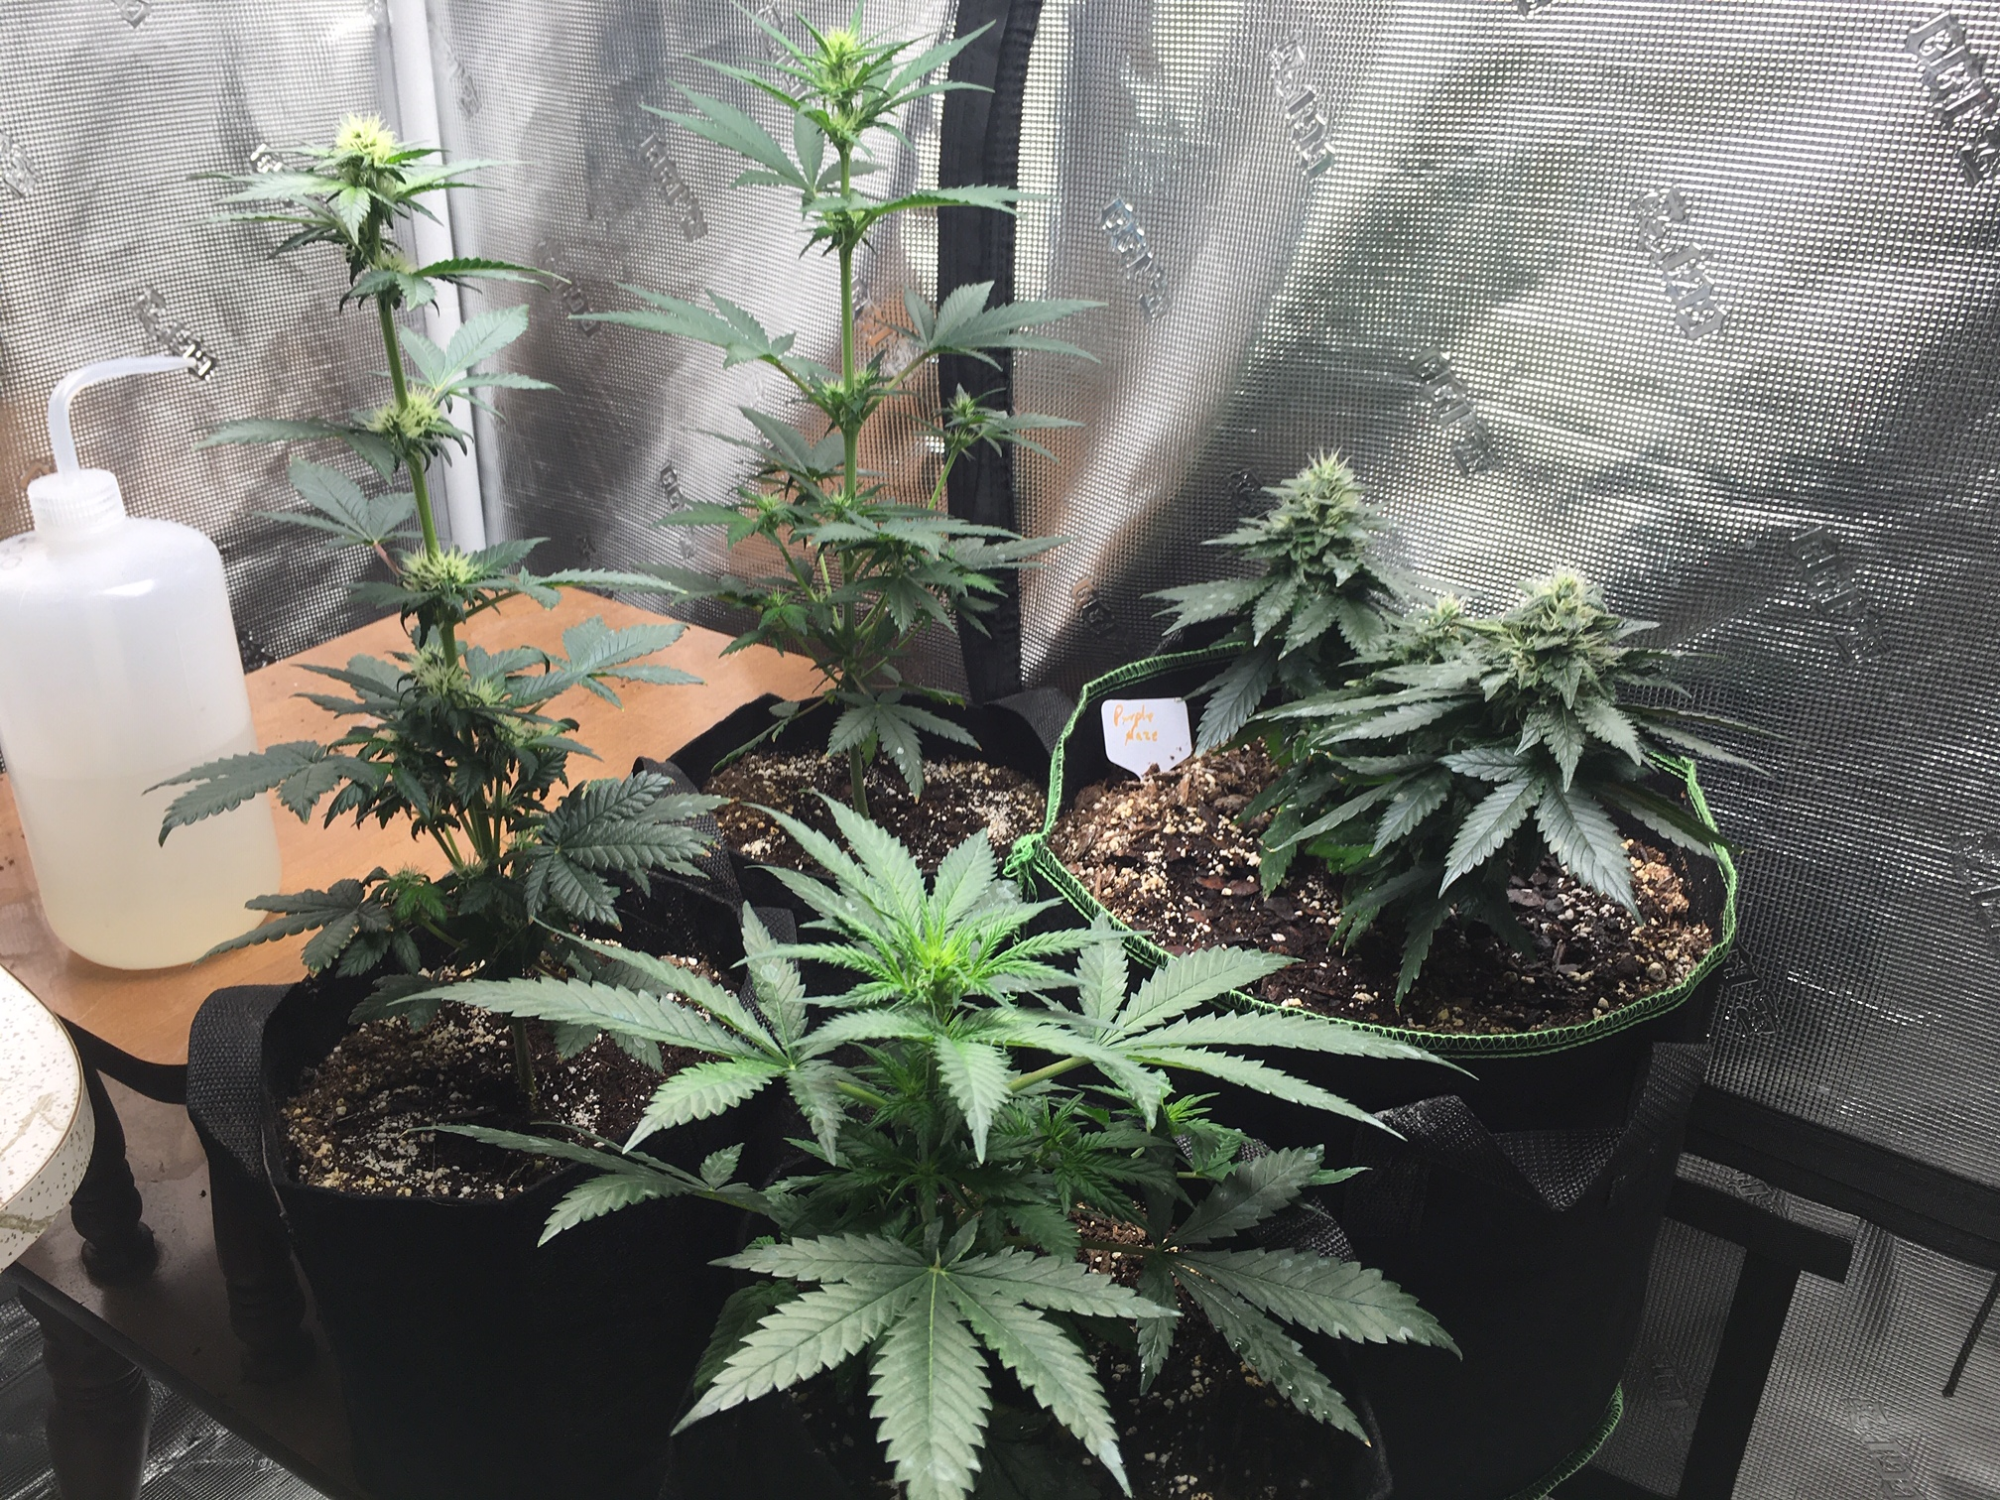 Problem i started a grow phase with 12 hour on cycle  now what